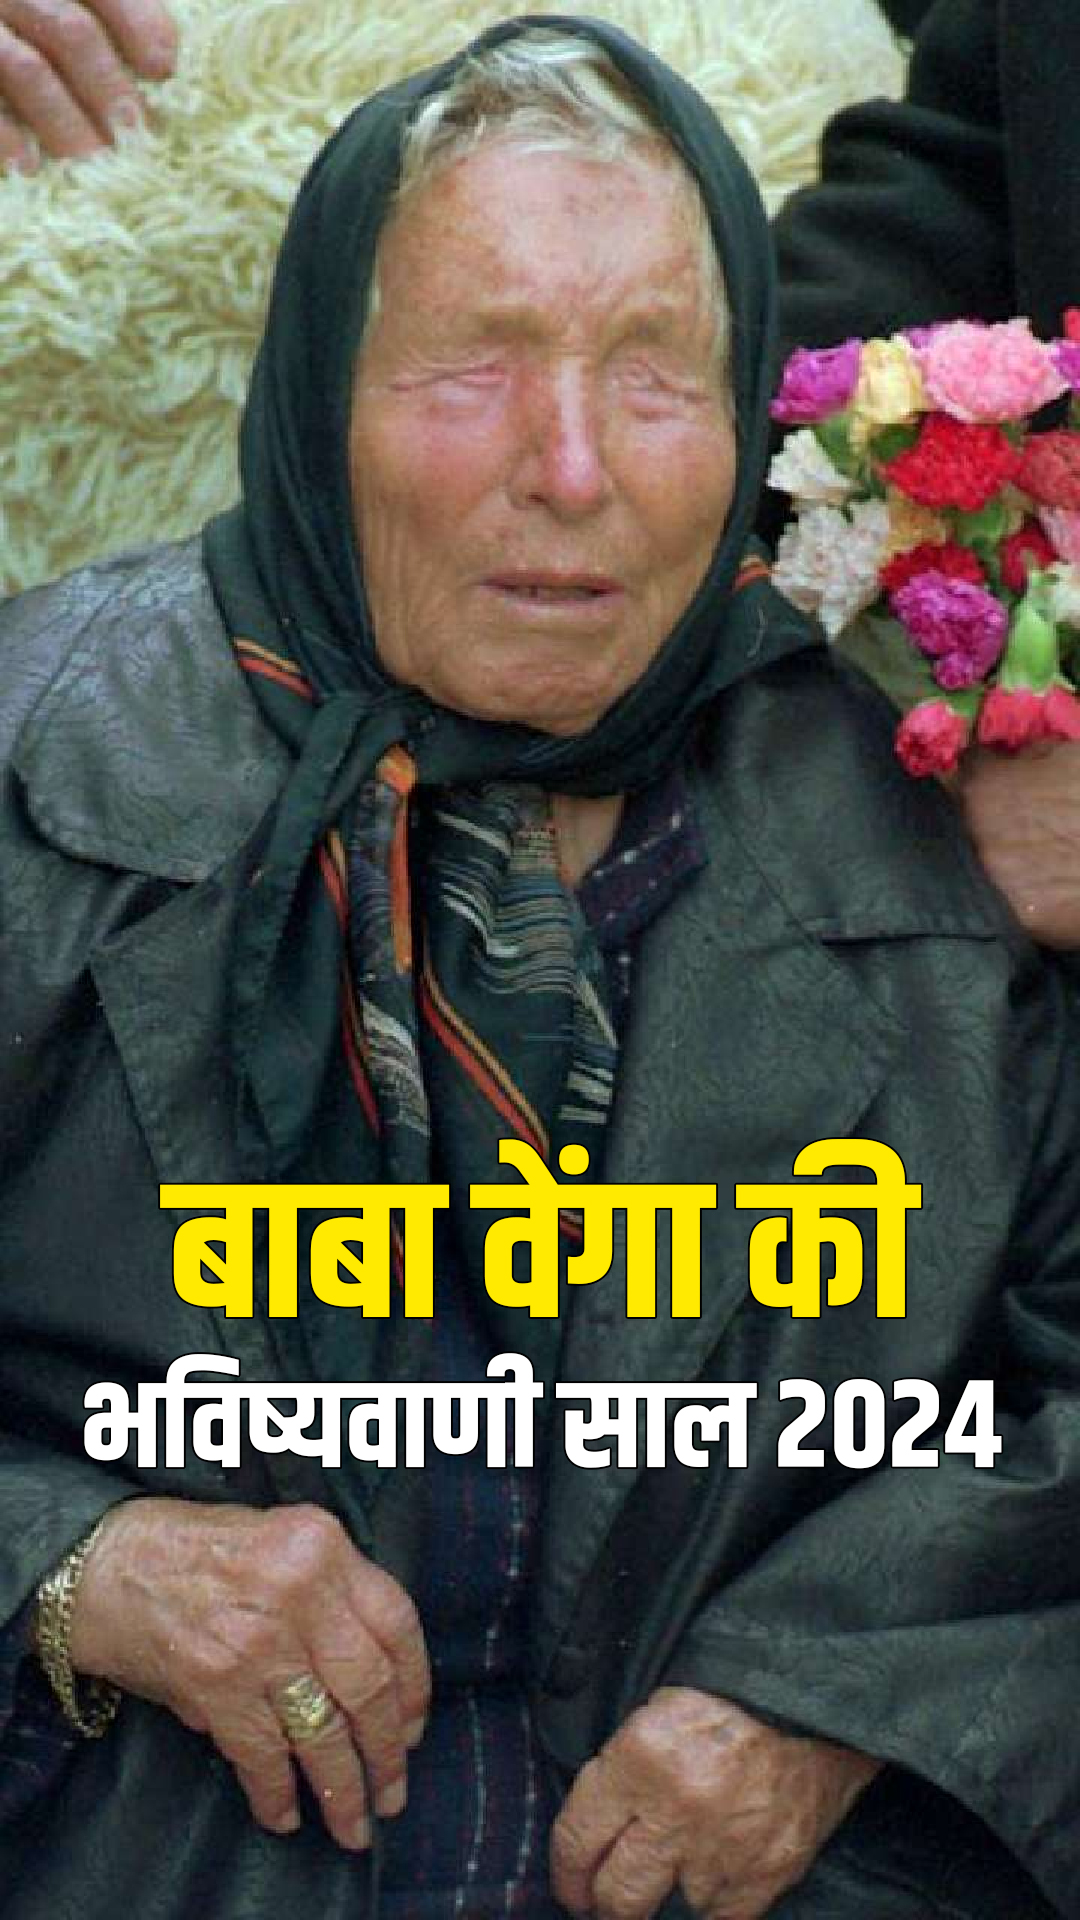 If Baba Venga's prediction comes true, there will be a big crisis in 2024.